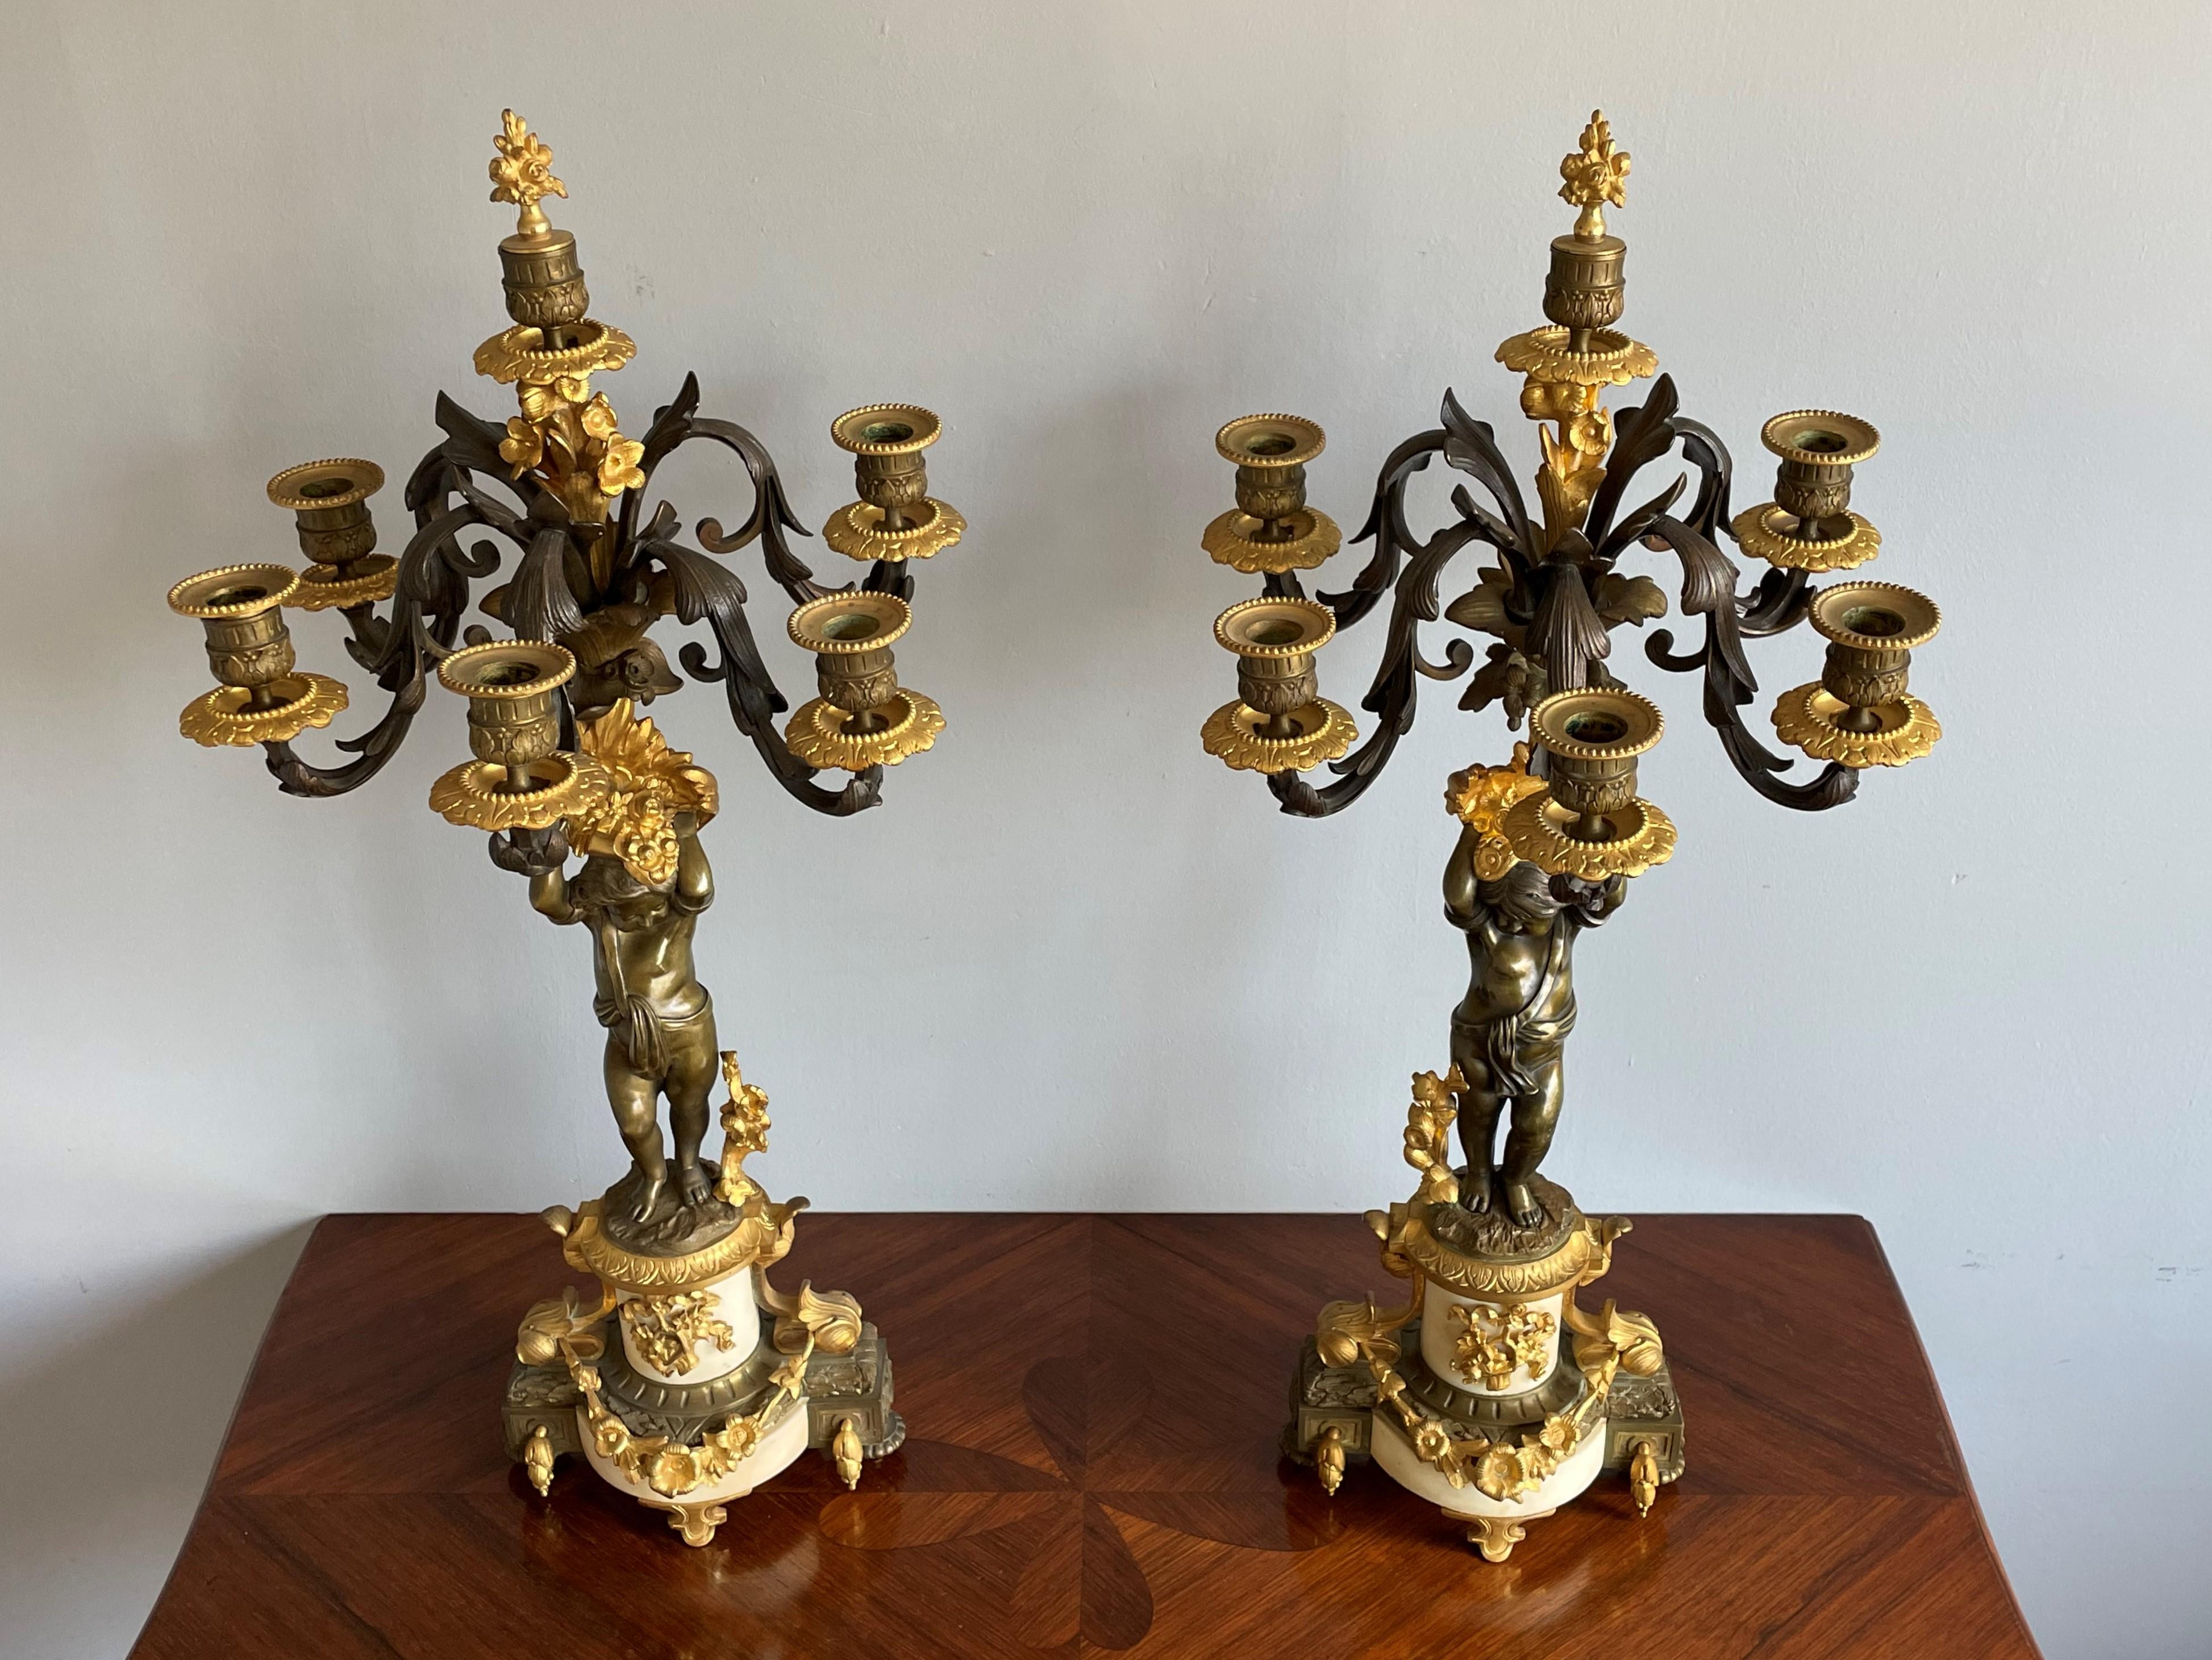 Stunning Pair of French Louis XVI Style Gilt Bronze & Marble Candle Candelabras For Sale 9